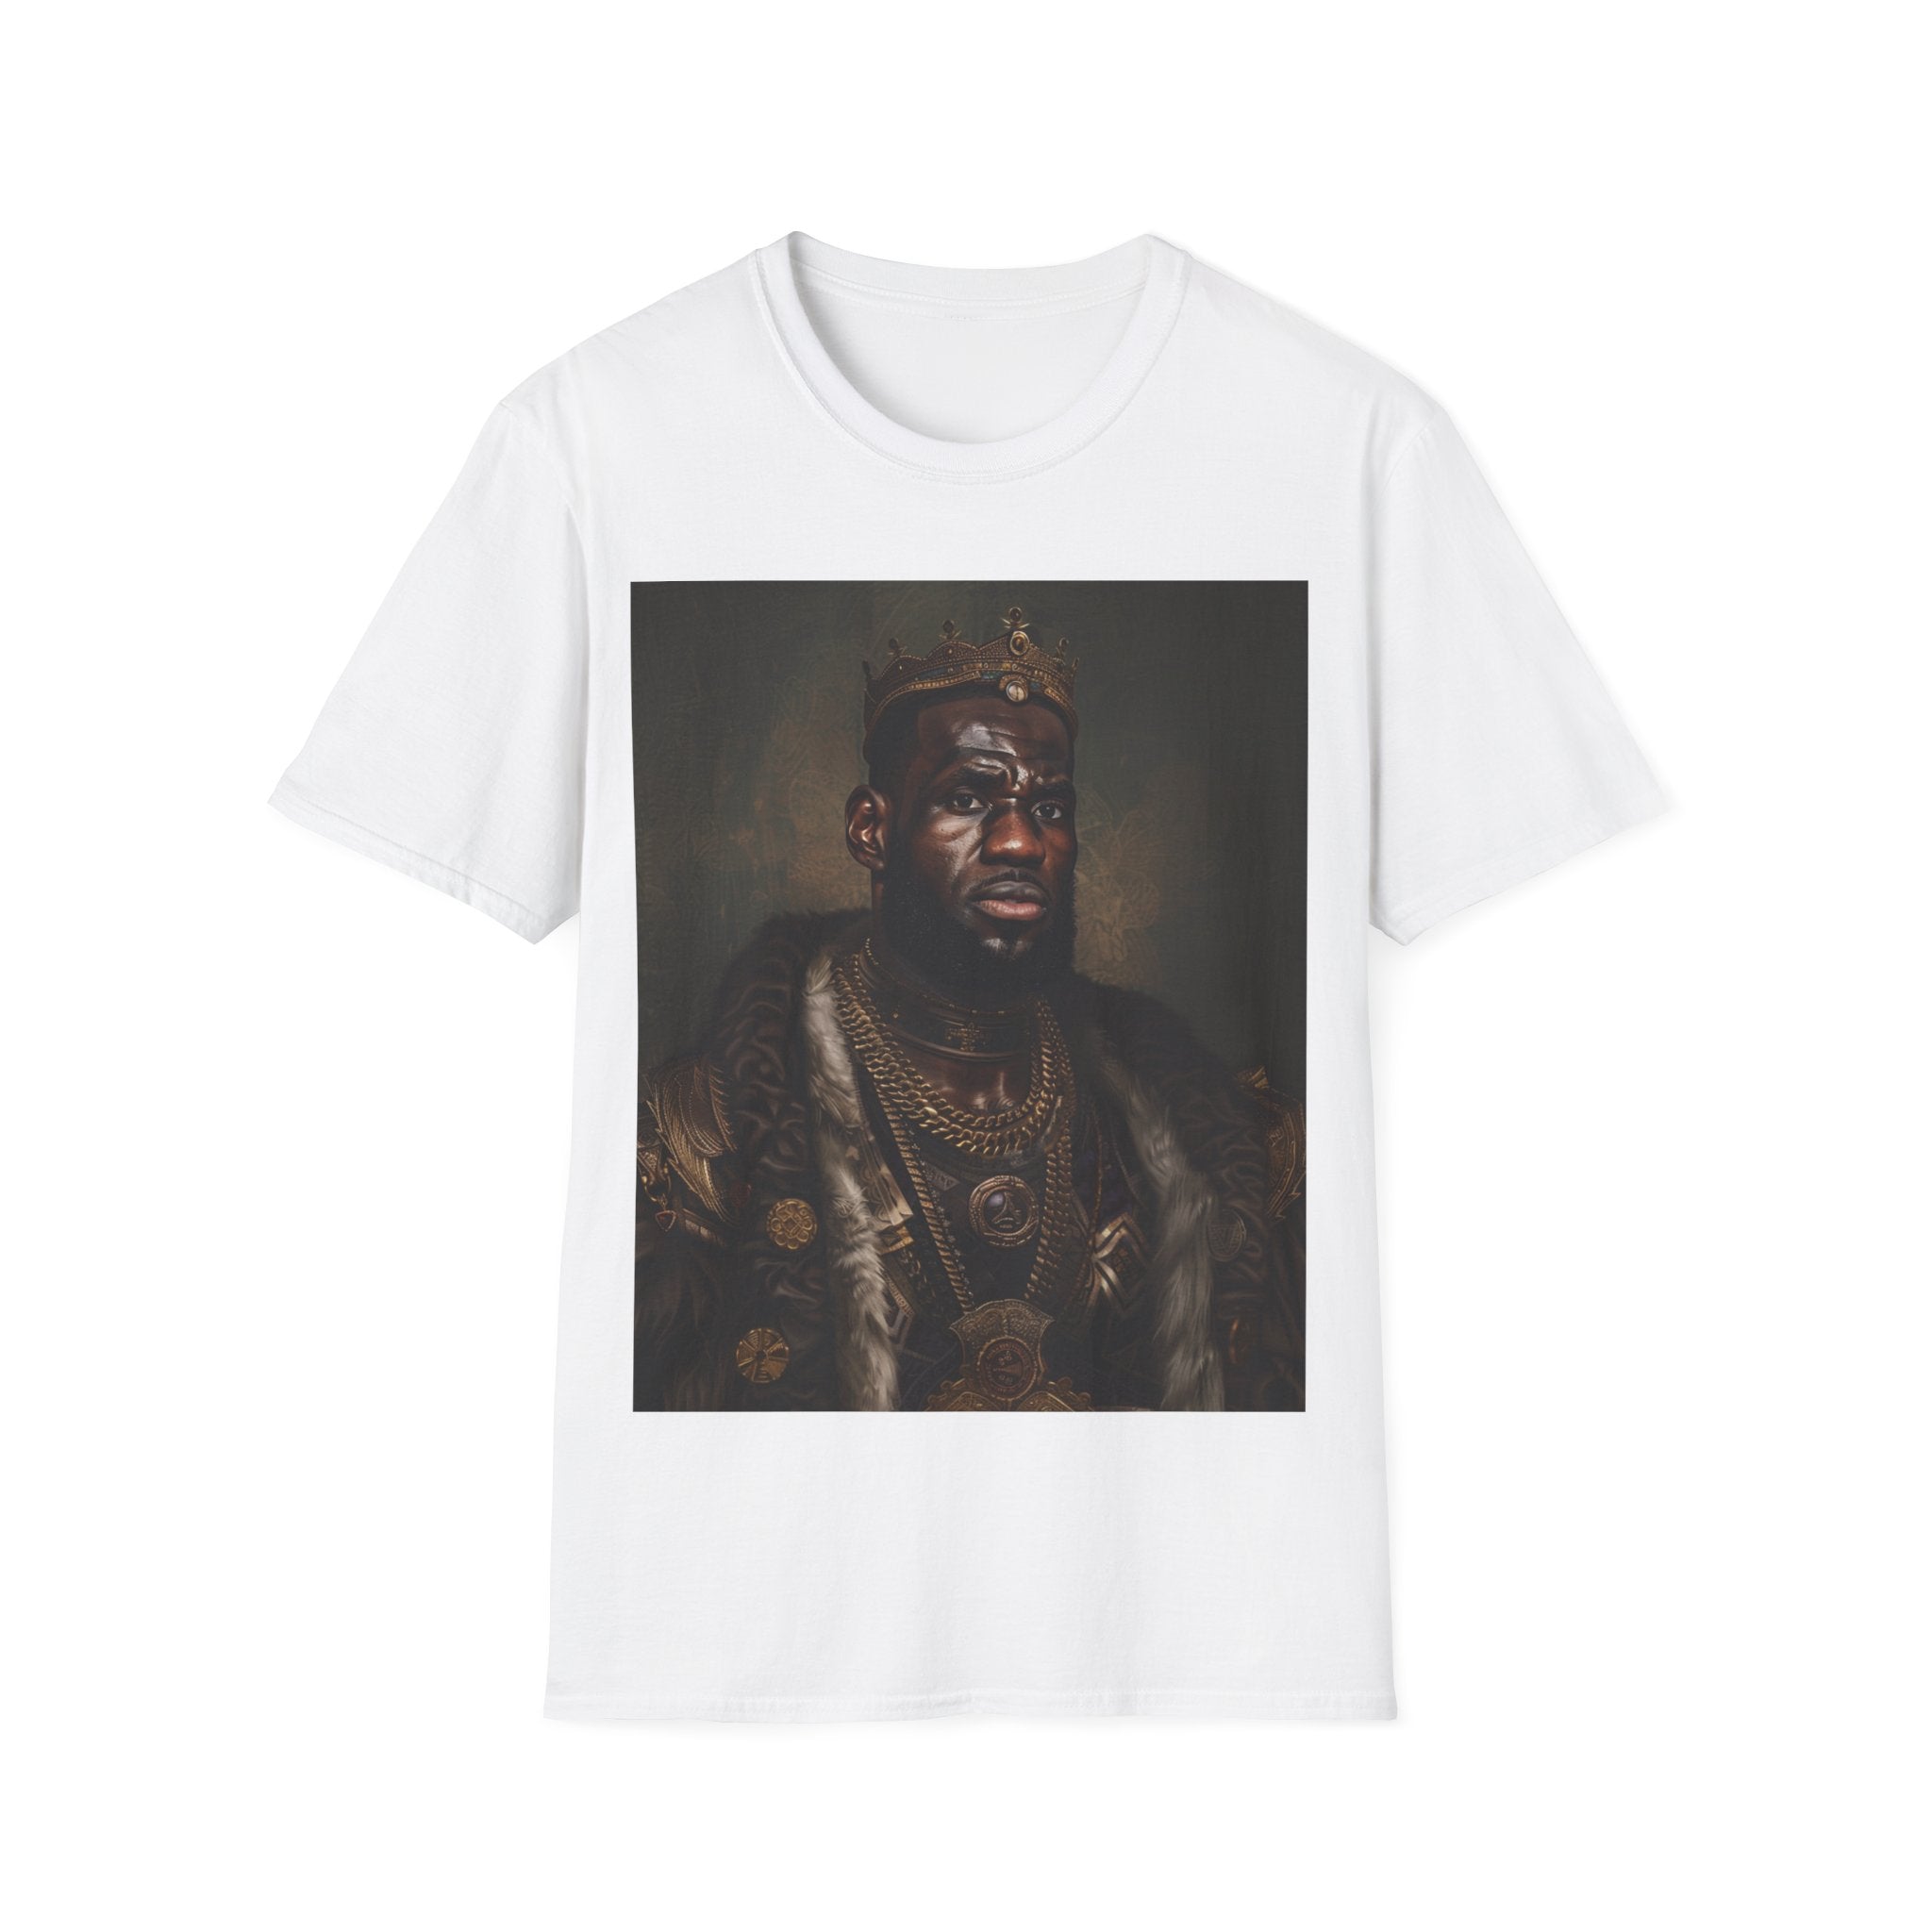 The image showcases the sophisticated unisex softstyle t-shirt, featuring a detailed and artistically rendered portrait of King James in the style of a Renaissance painting. The quality of the softstyle material is evident, promising comfort and durability, while the design speaks to the blend of sports legacy and classical elegance. Inspired by Lebron James.